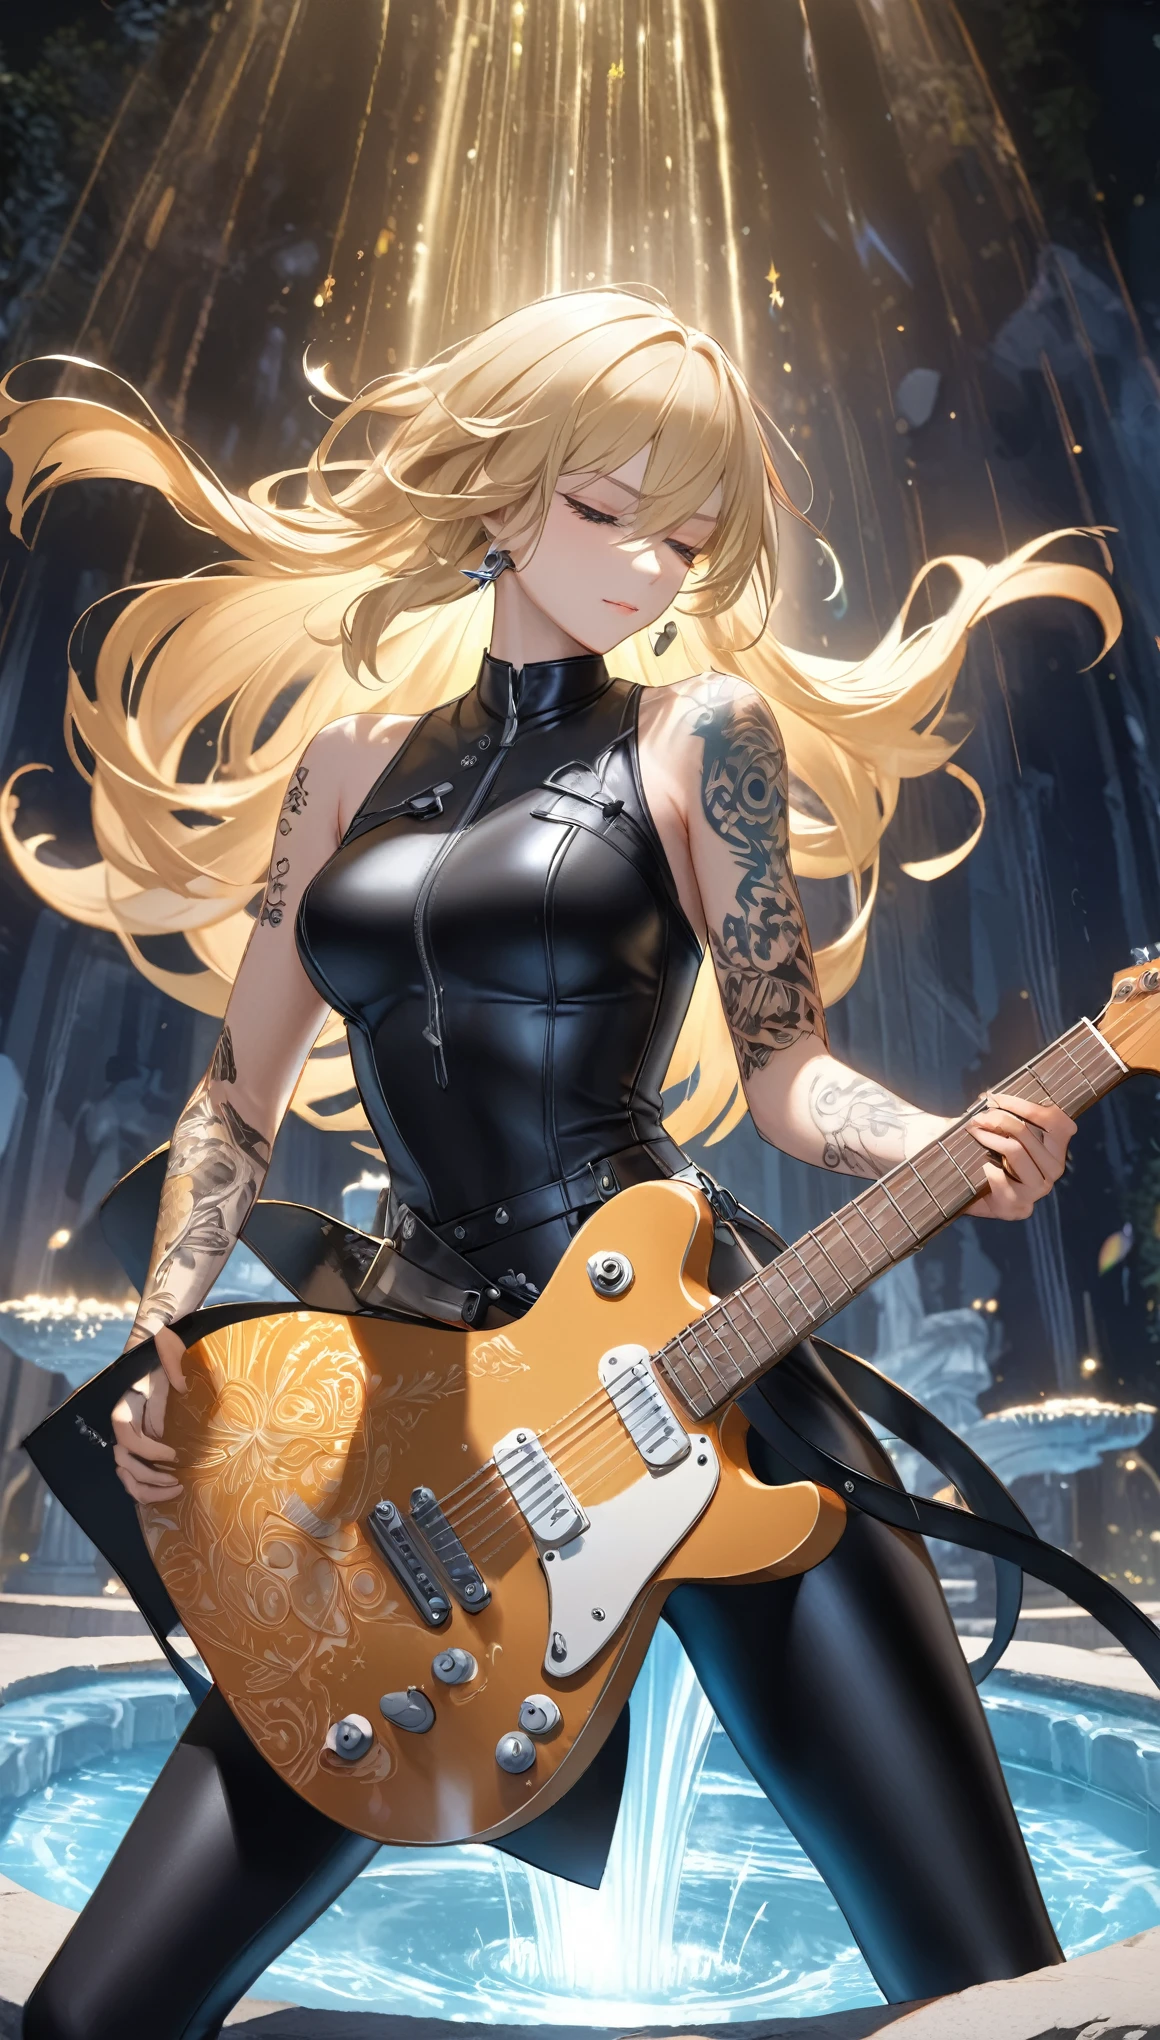 best quality, super fine, 16k, extremely detailed, 2.5D, delicate and dynamic, beautiful and cool rock guitarist playing guitar solo while standing in the center of stone fountain, cool guitar with star-shaped body, slim and tight leather outfit, tattoo on arms, blonde hair, cool standing posture, mysterious and fantastical light-up effect